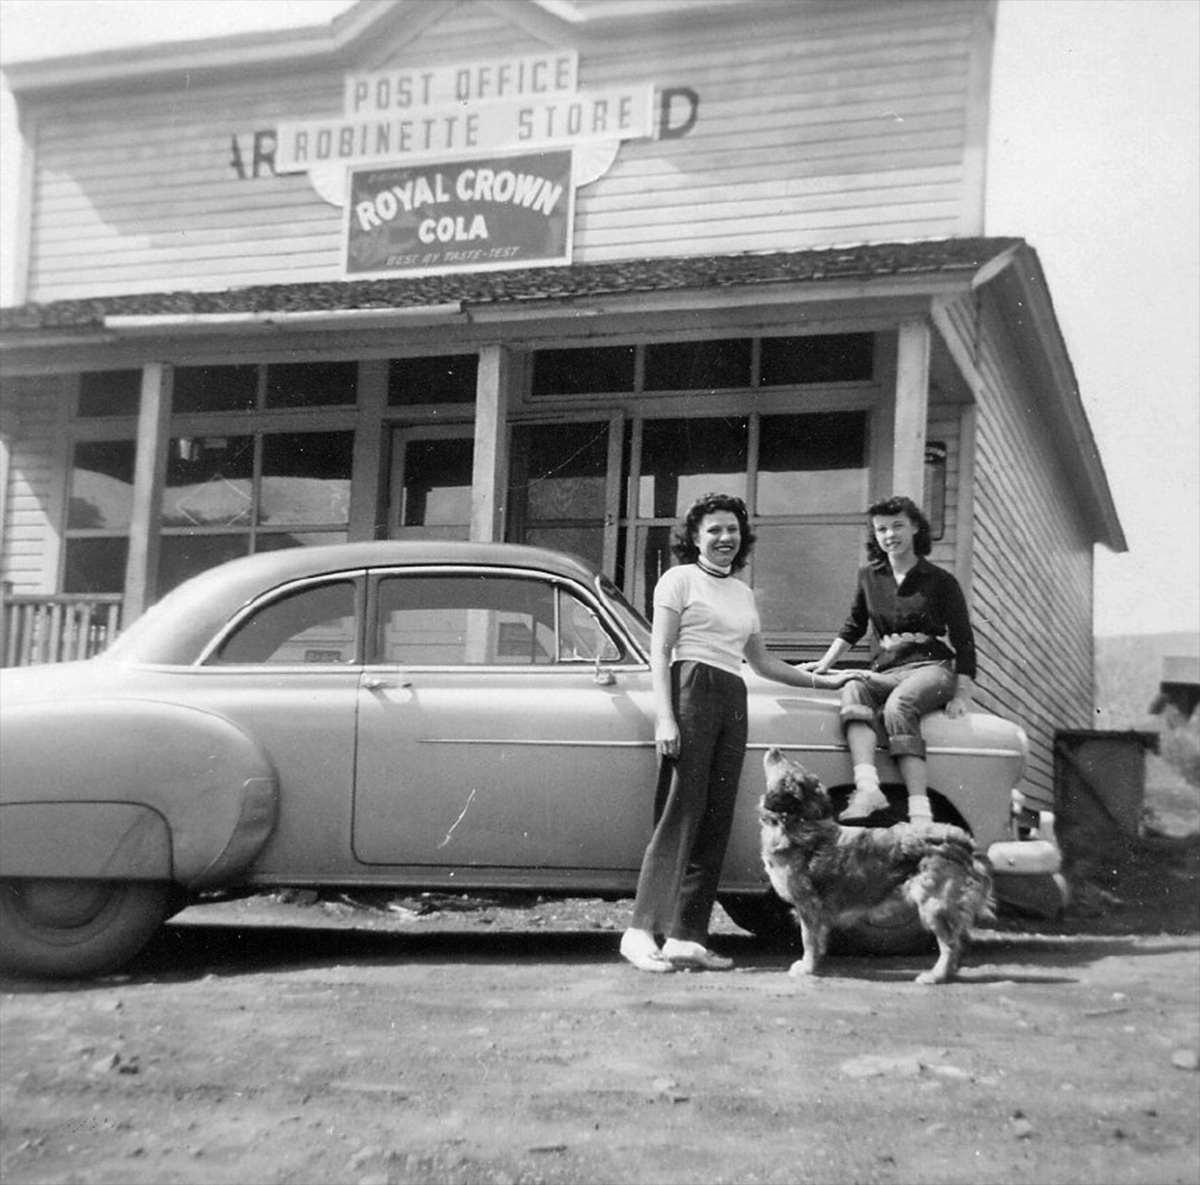 Robinette. Robinette Store and Post Office. Postmistress and store owner Francis "Frankie" Carrithers with daughter, Diane, and family dog Tojo. The store was located across the street from the depot. Before Robinette was inundated by waters from Brownlee Dam in 1958, the store was moved to Richland, where it stands today on Main St. Photo courtesy Baker County Public Library